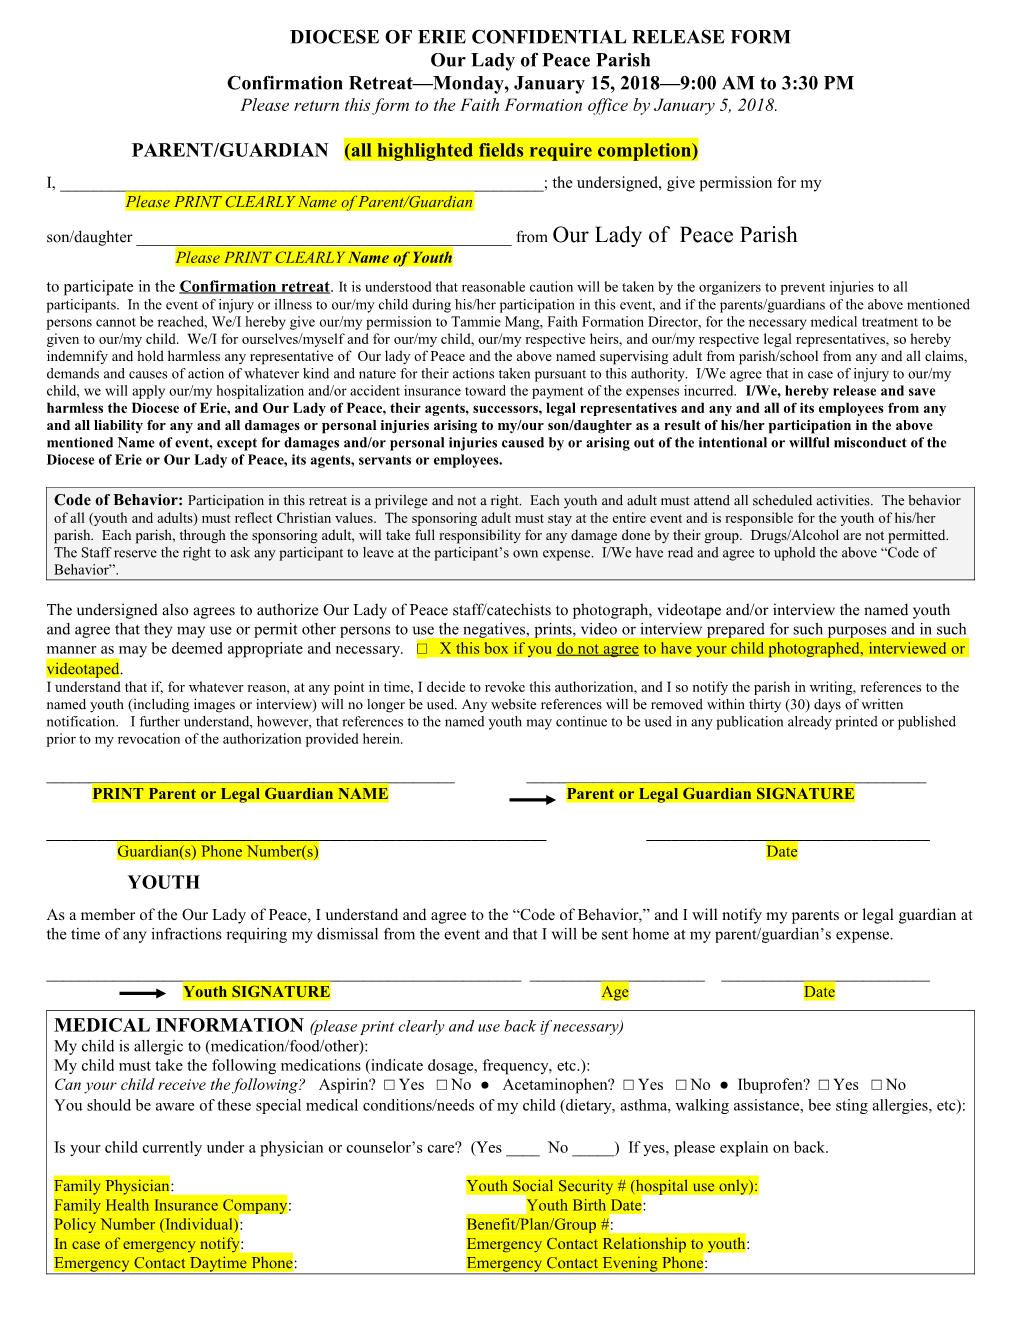 Diocese of Erie Youth Confidential Release Form